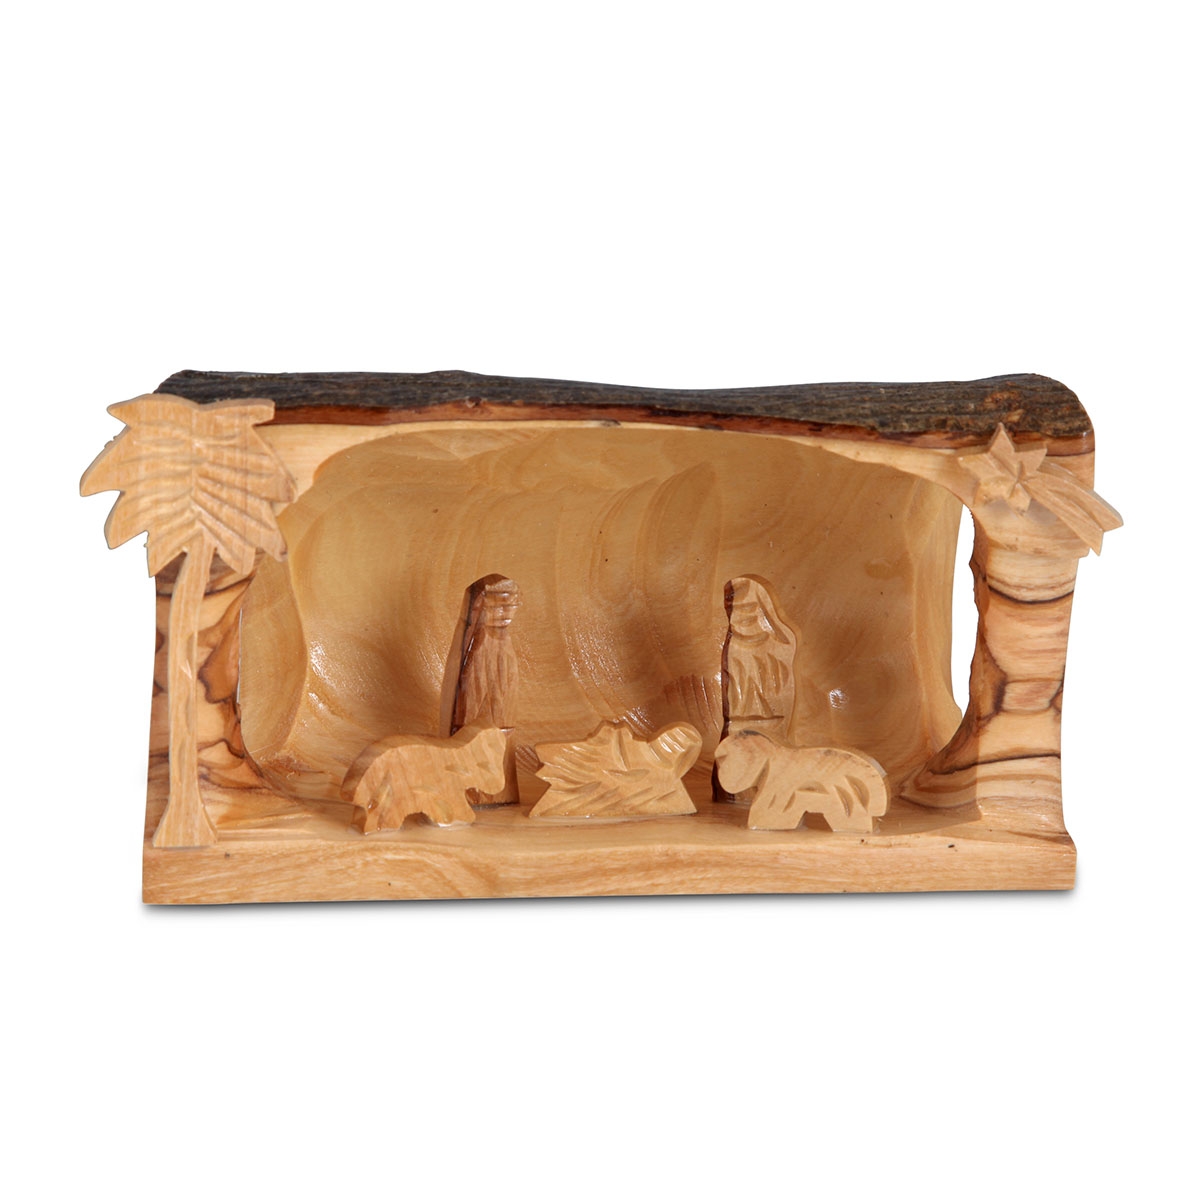 Small Olive Wood Hand-Carved Nativity Scene - 1